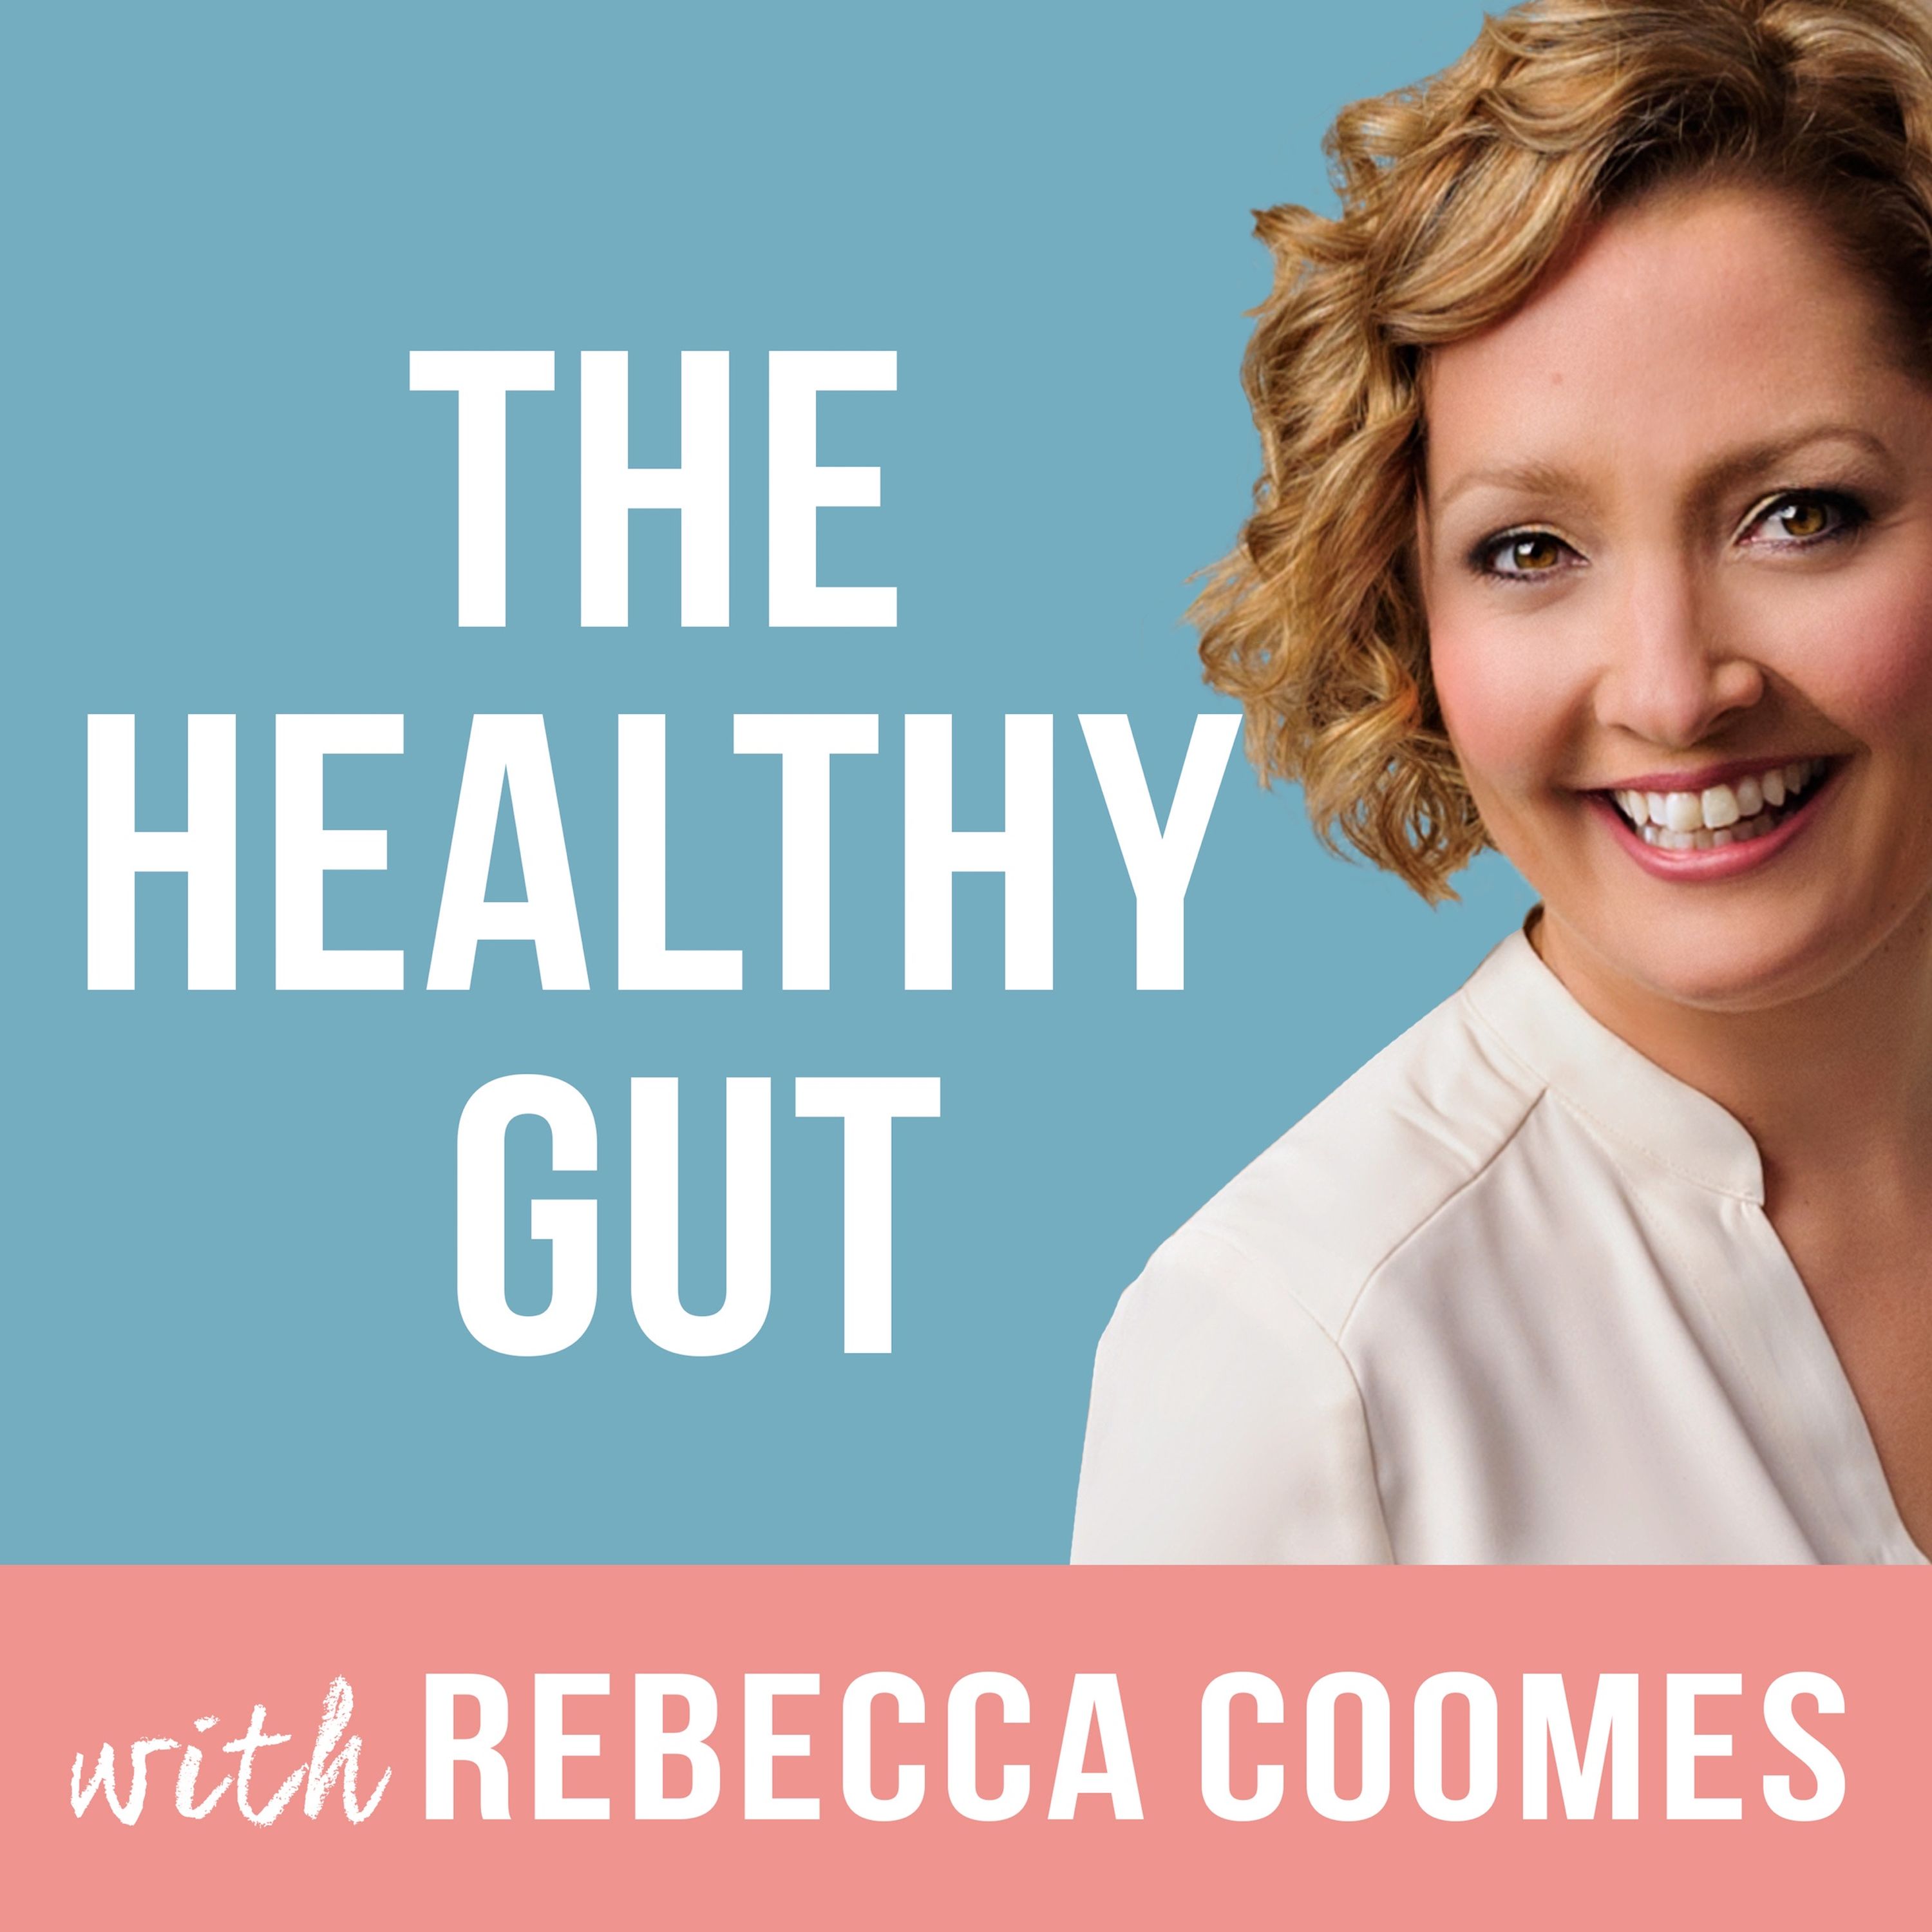 4 - Step Gut Healing with Lee Holmes | Ep. 26